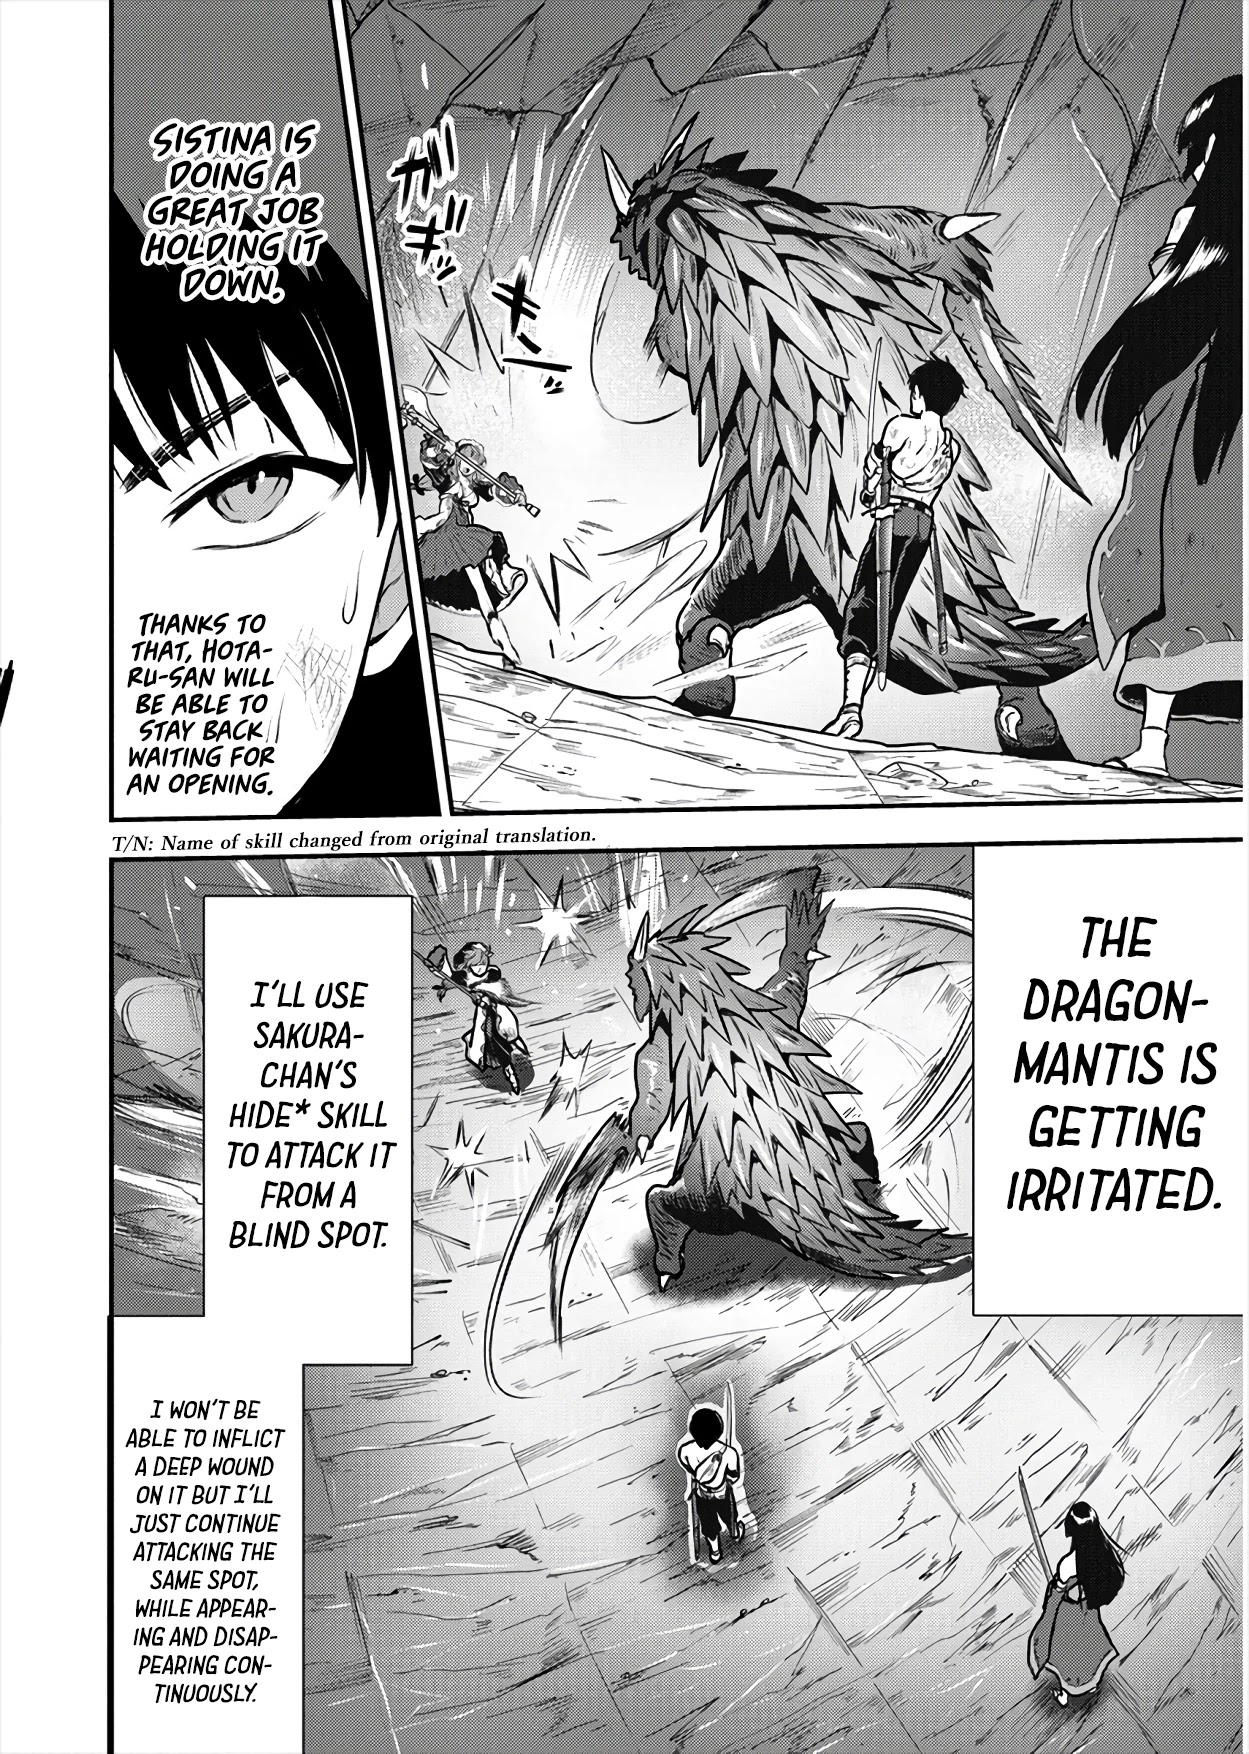 The Cursed Sword Master’S Harem Life: By The Sword, For The Sword, Cursed Sword Master - 17 page 21-35810fd7